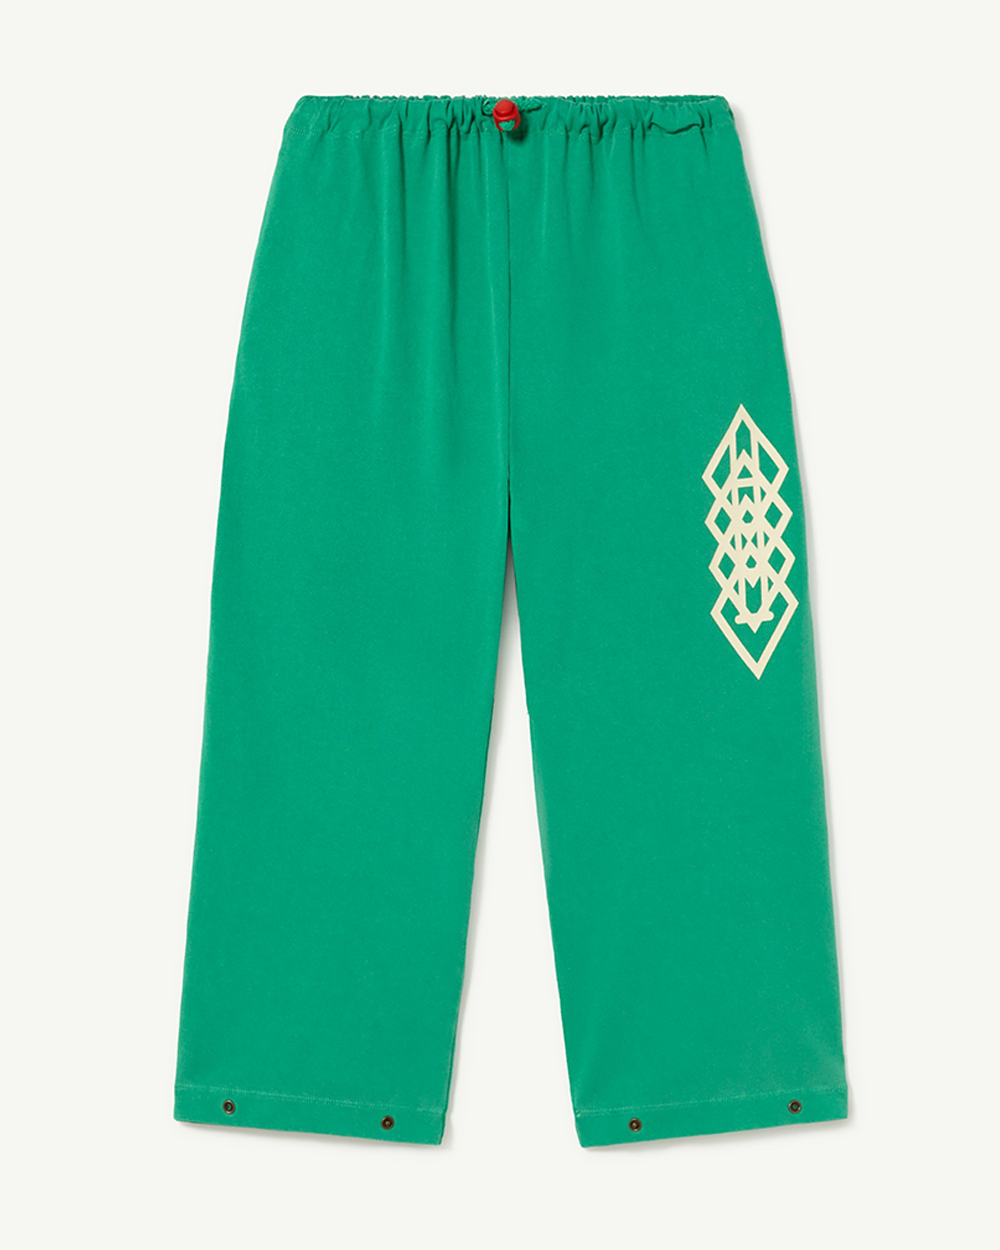 [TAO] F23037_028_DY / STAG KIDS PANTS GREEN UNIFORMS [12Y]